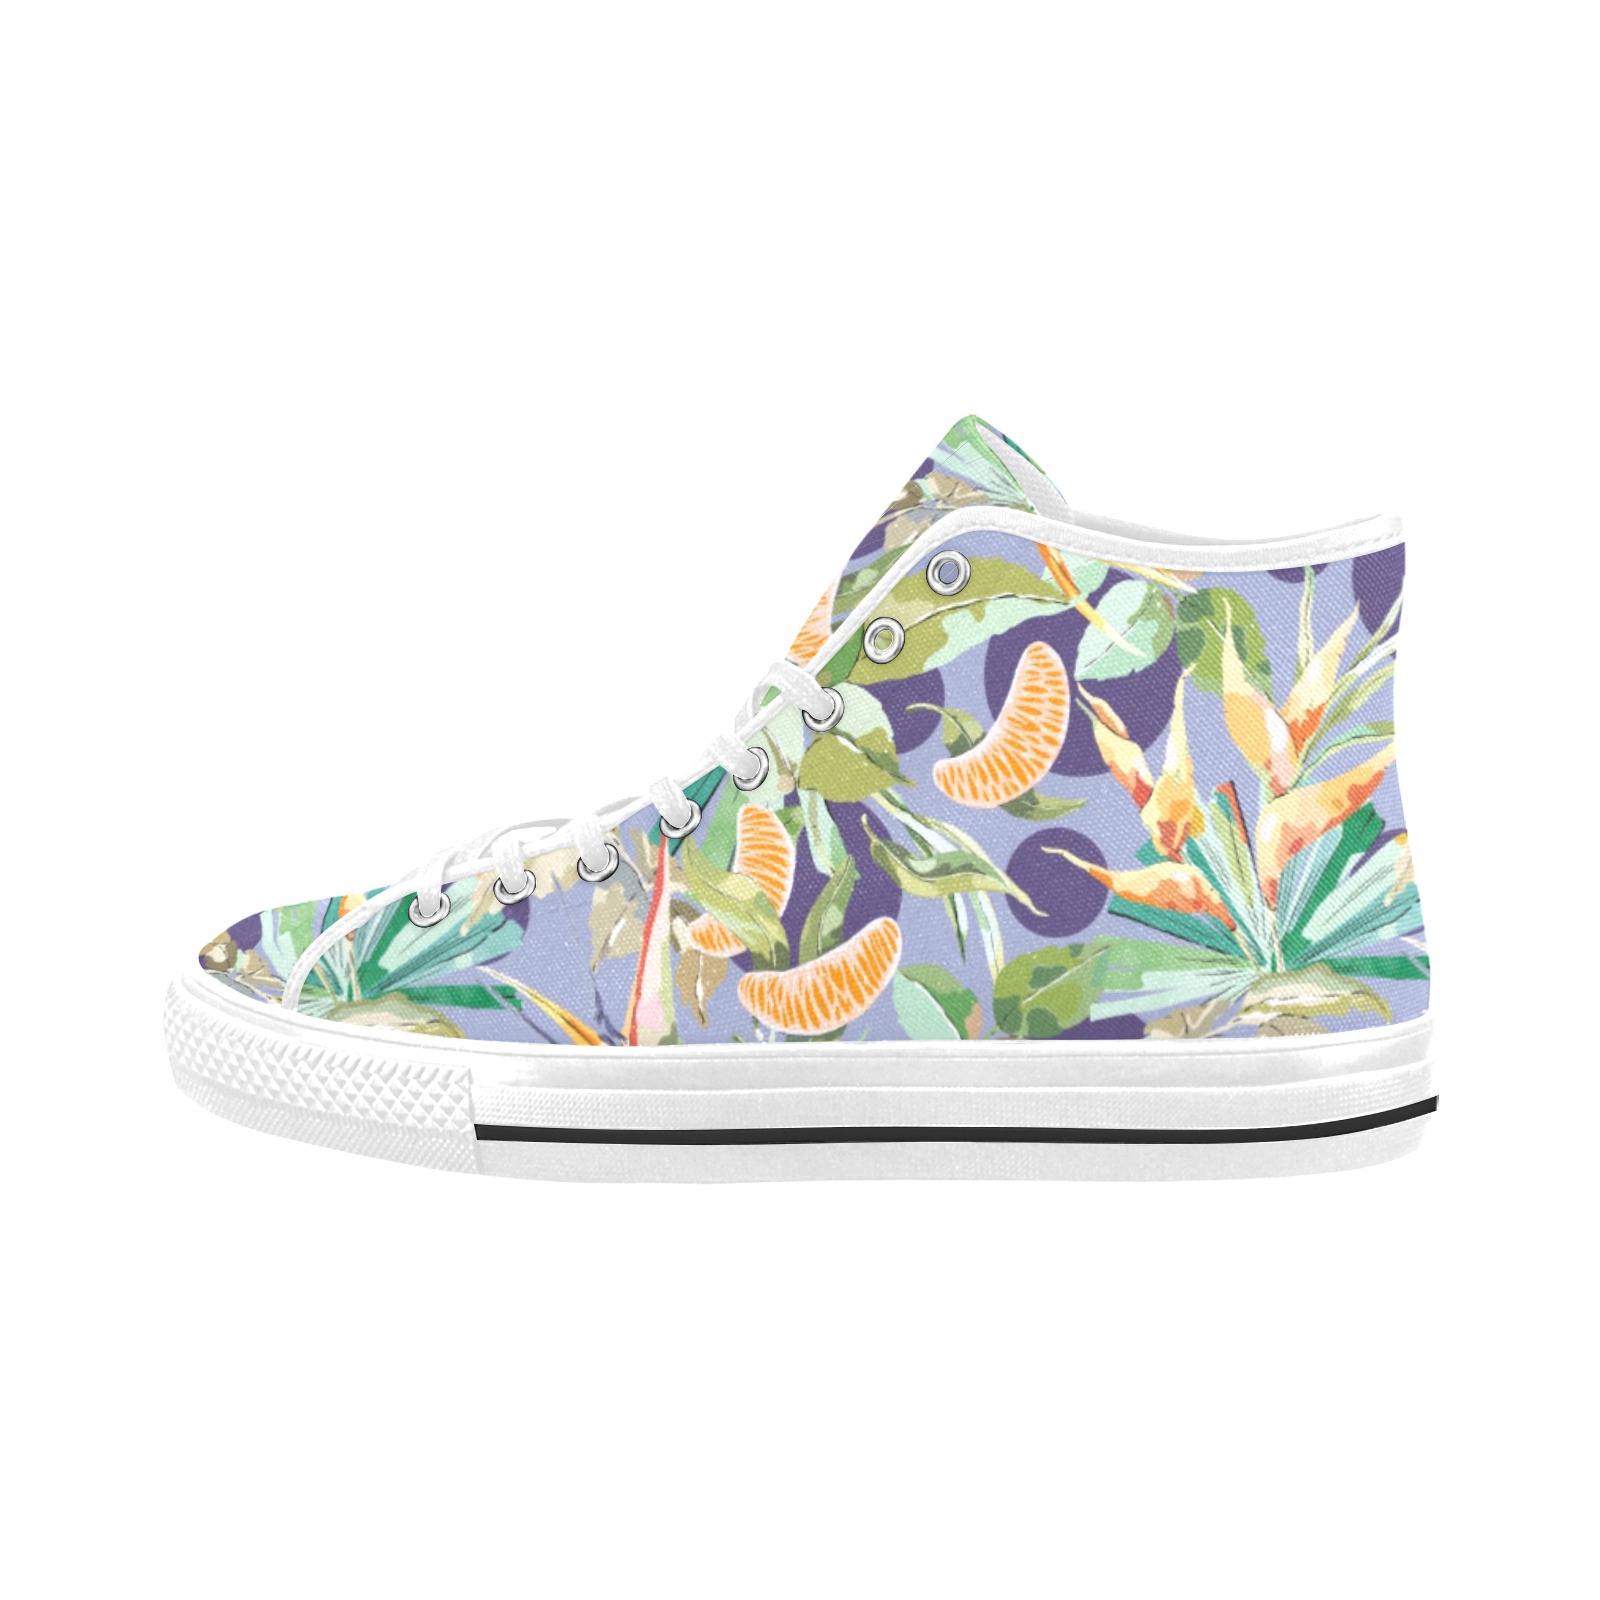 Orange in the palms jungle 103 Vancouver H Women's Canvas Shoes (1013-1)